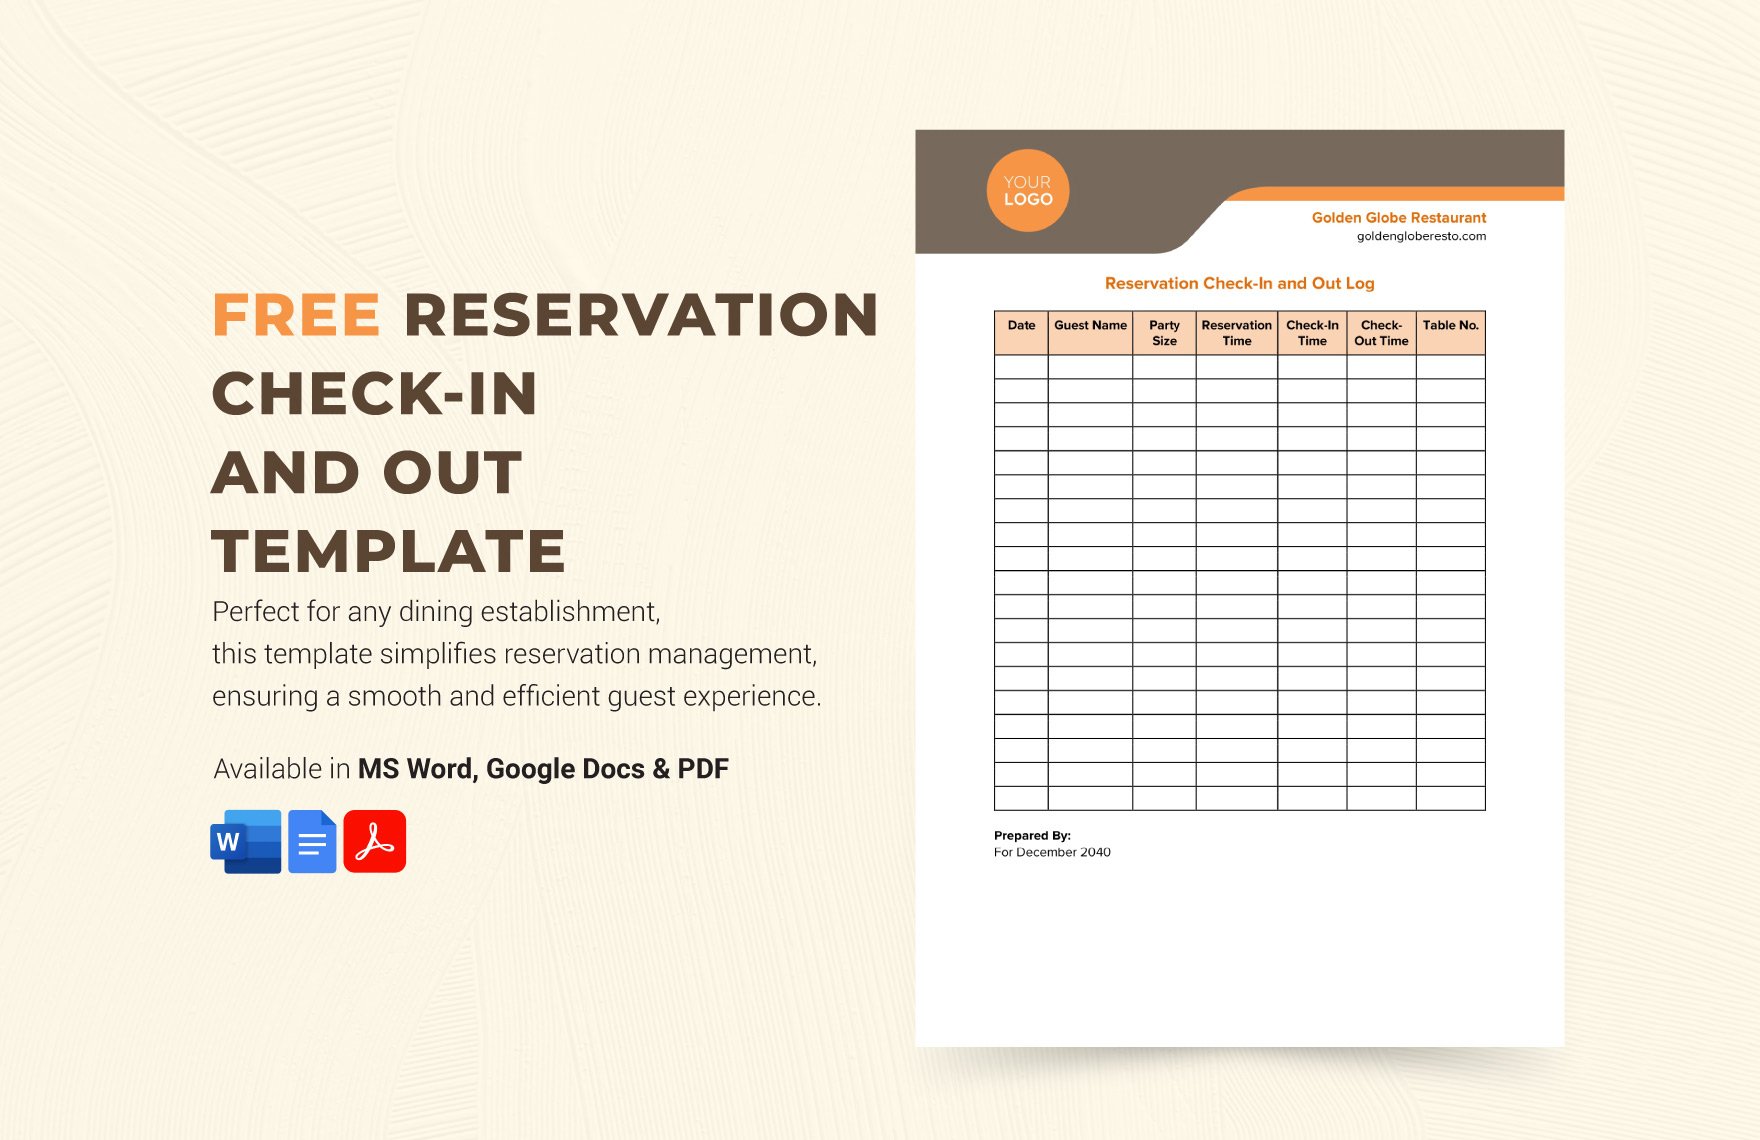 Free Reservation Check-in and Out Template